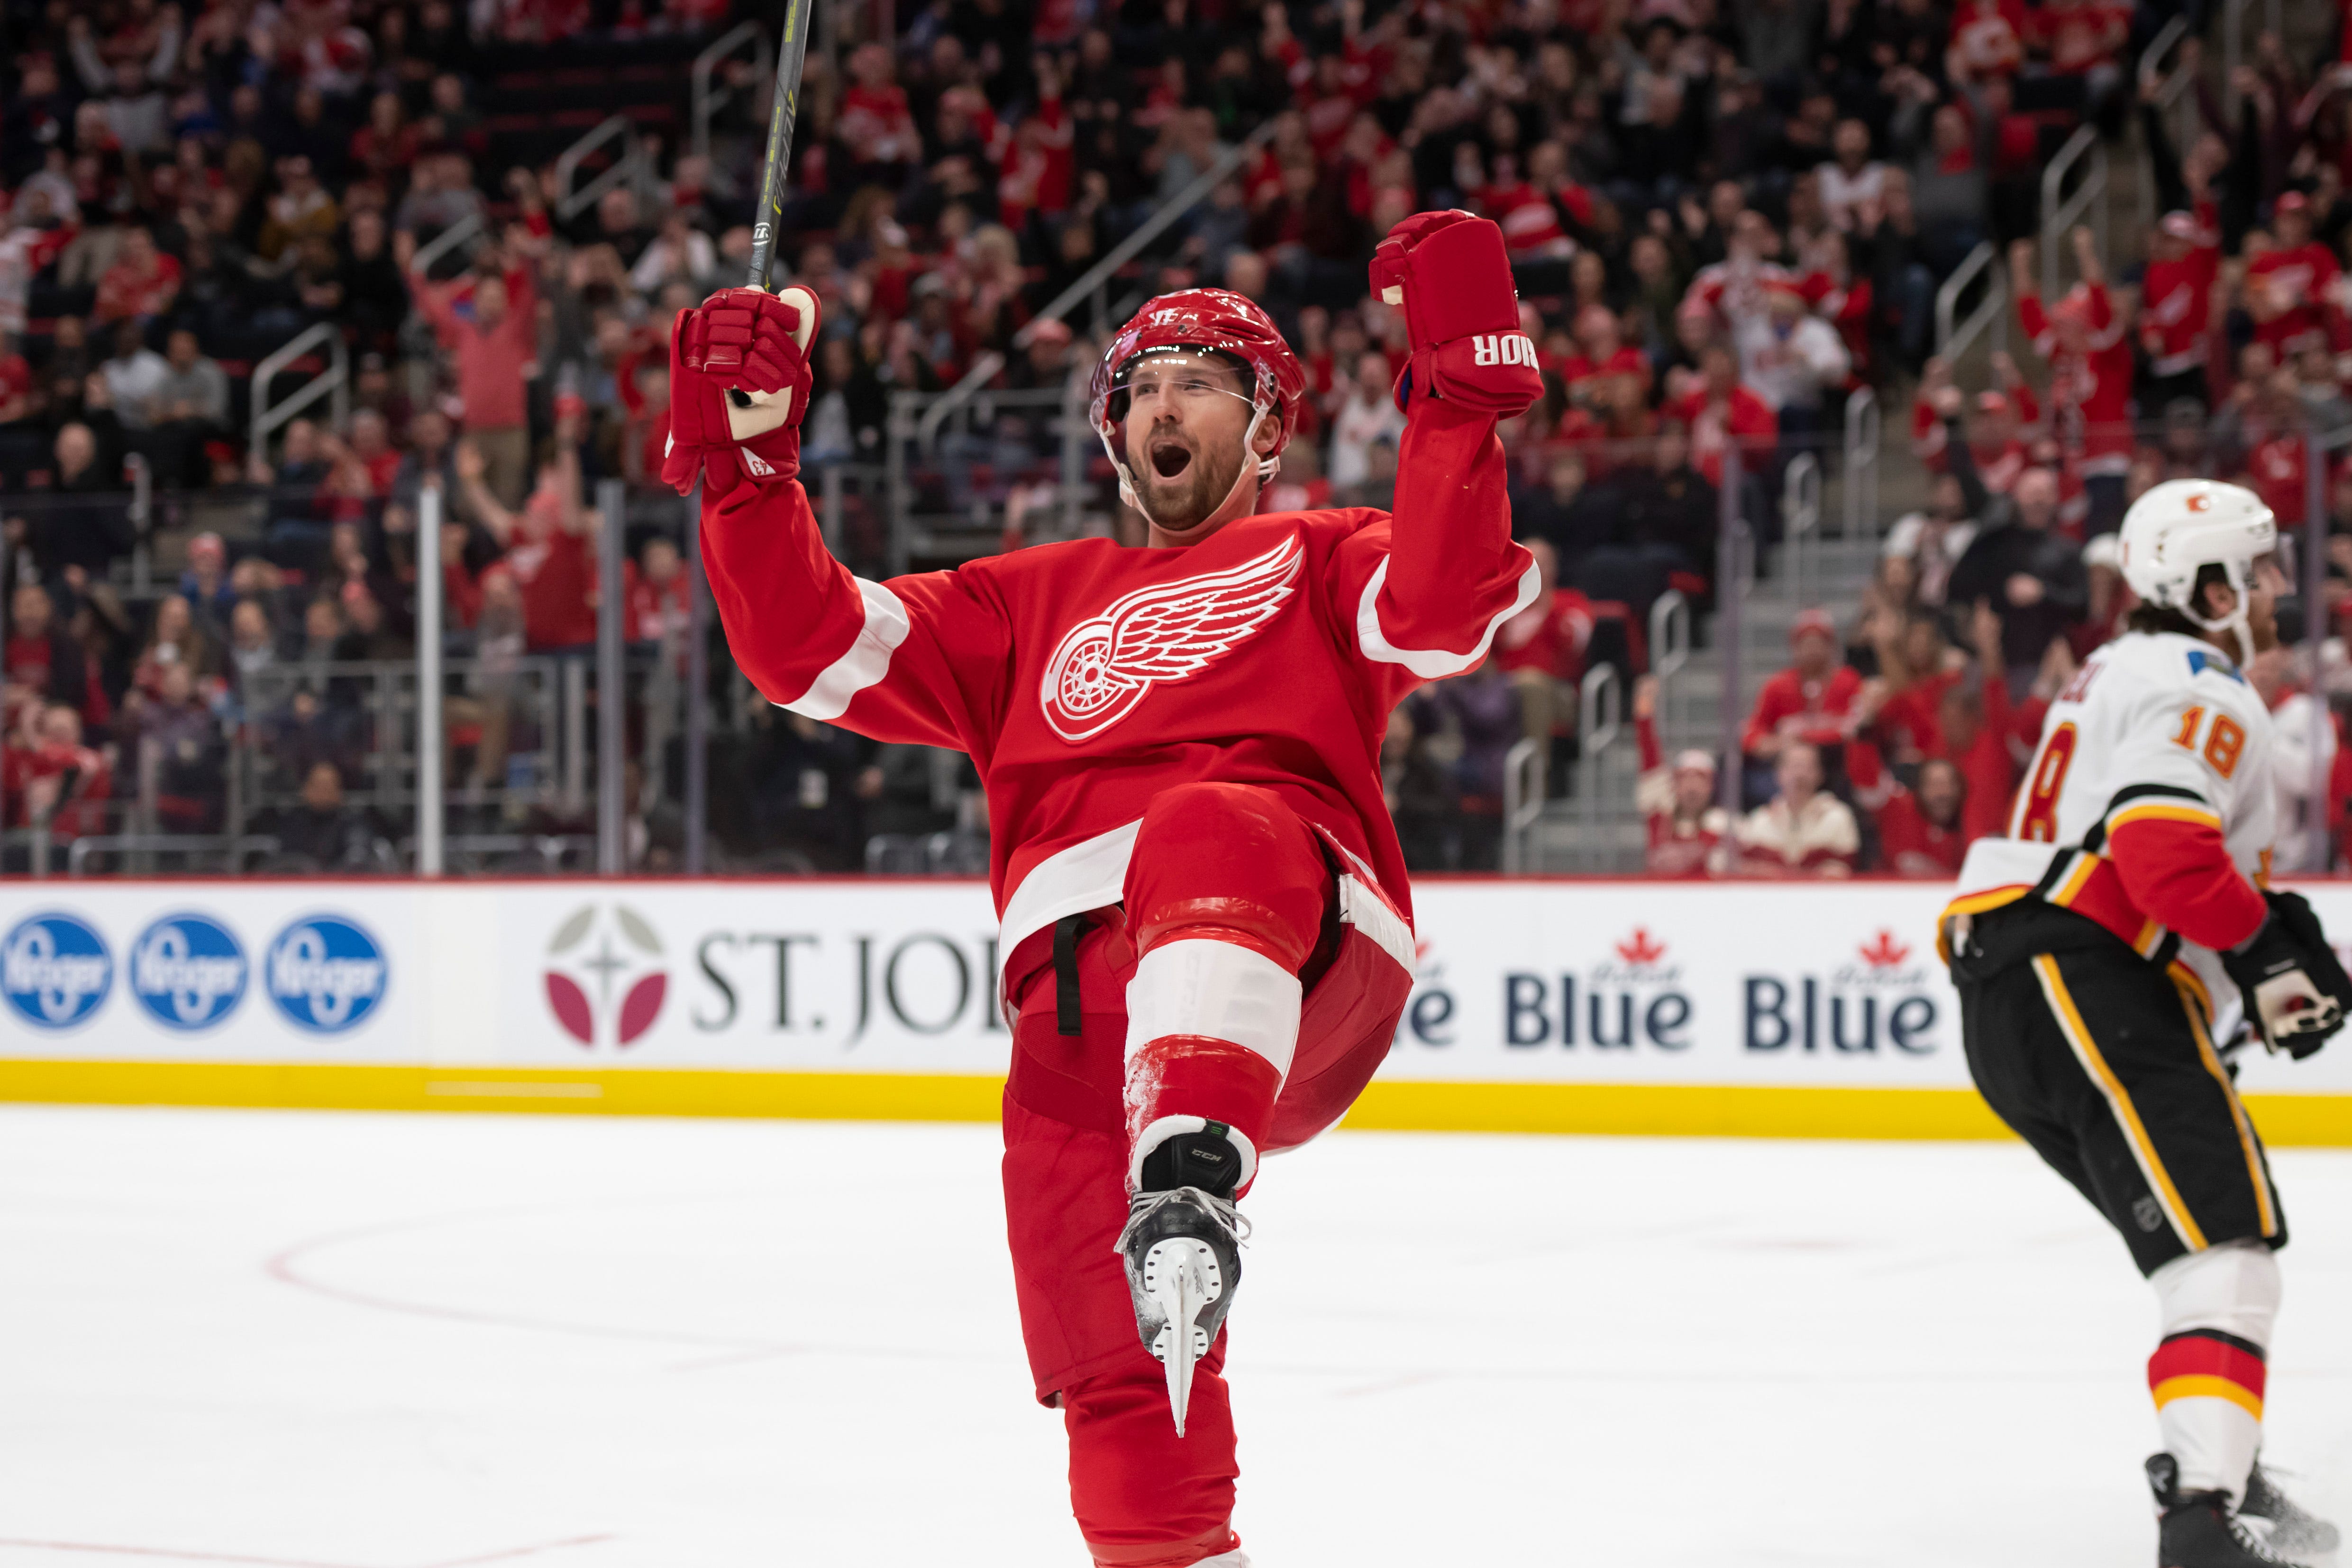 23. Darren Helm, left wing. There was hope early in his career Helm would develop into a consistent 12- to 16-goal scorer, but hasn’t materialized, partly because of a litany of injuries. Helm, 32, still plays with speed and remains an effective penalty killer.